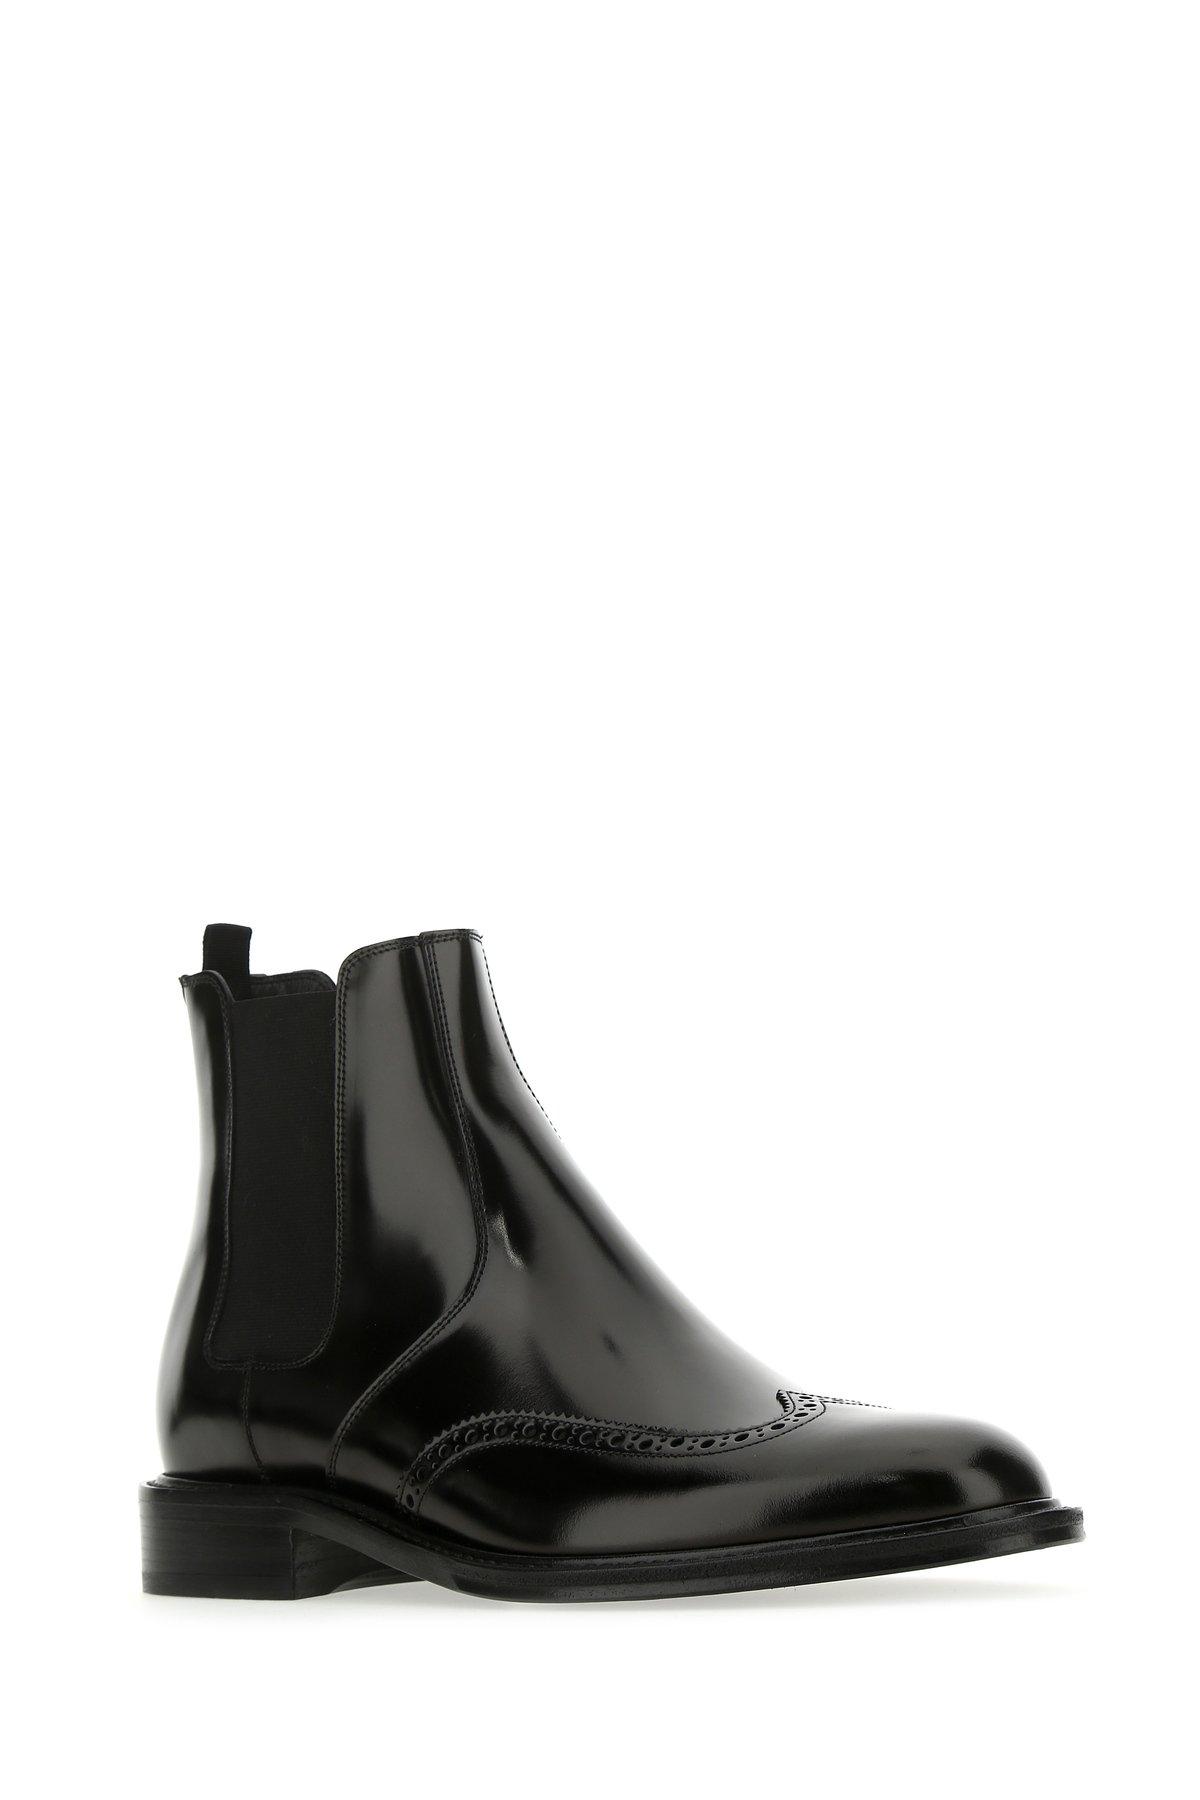 Saint Laurent Leather 'army' Chelsea Boots in Black for Men - Save 